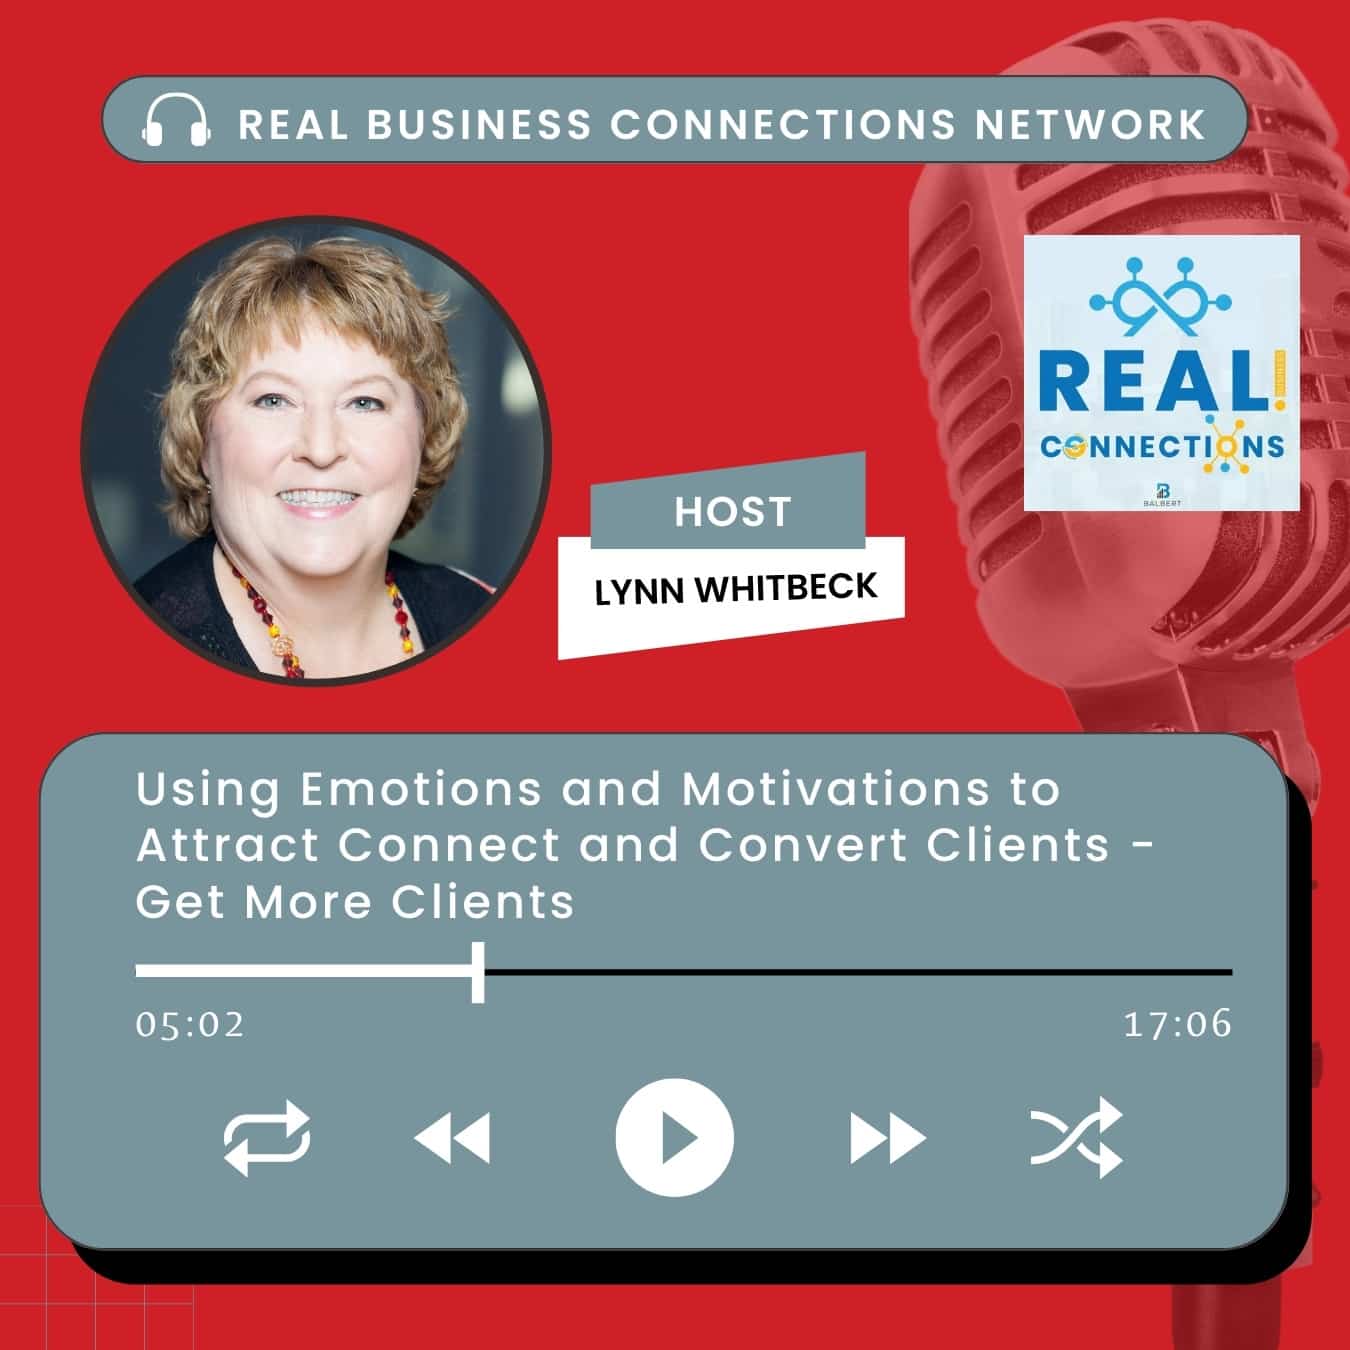 Using Emotions and Motivations to Attract Connect Convert Clients